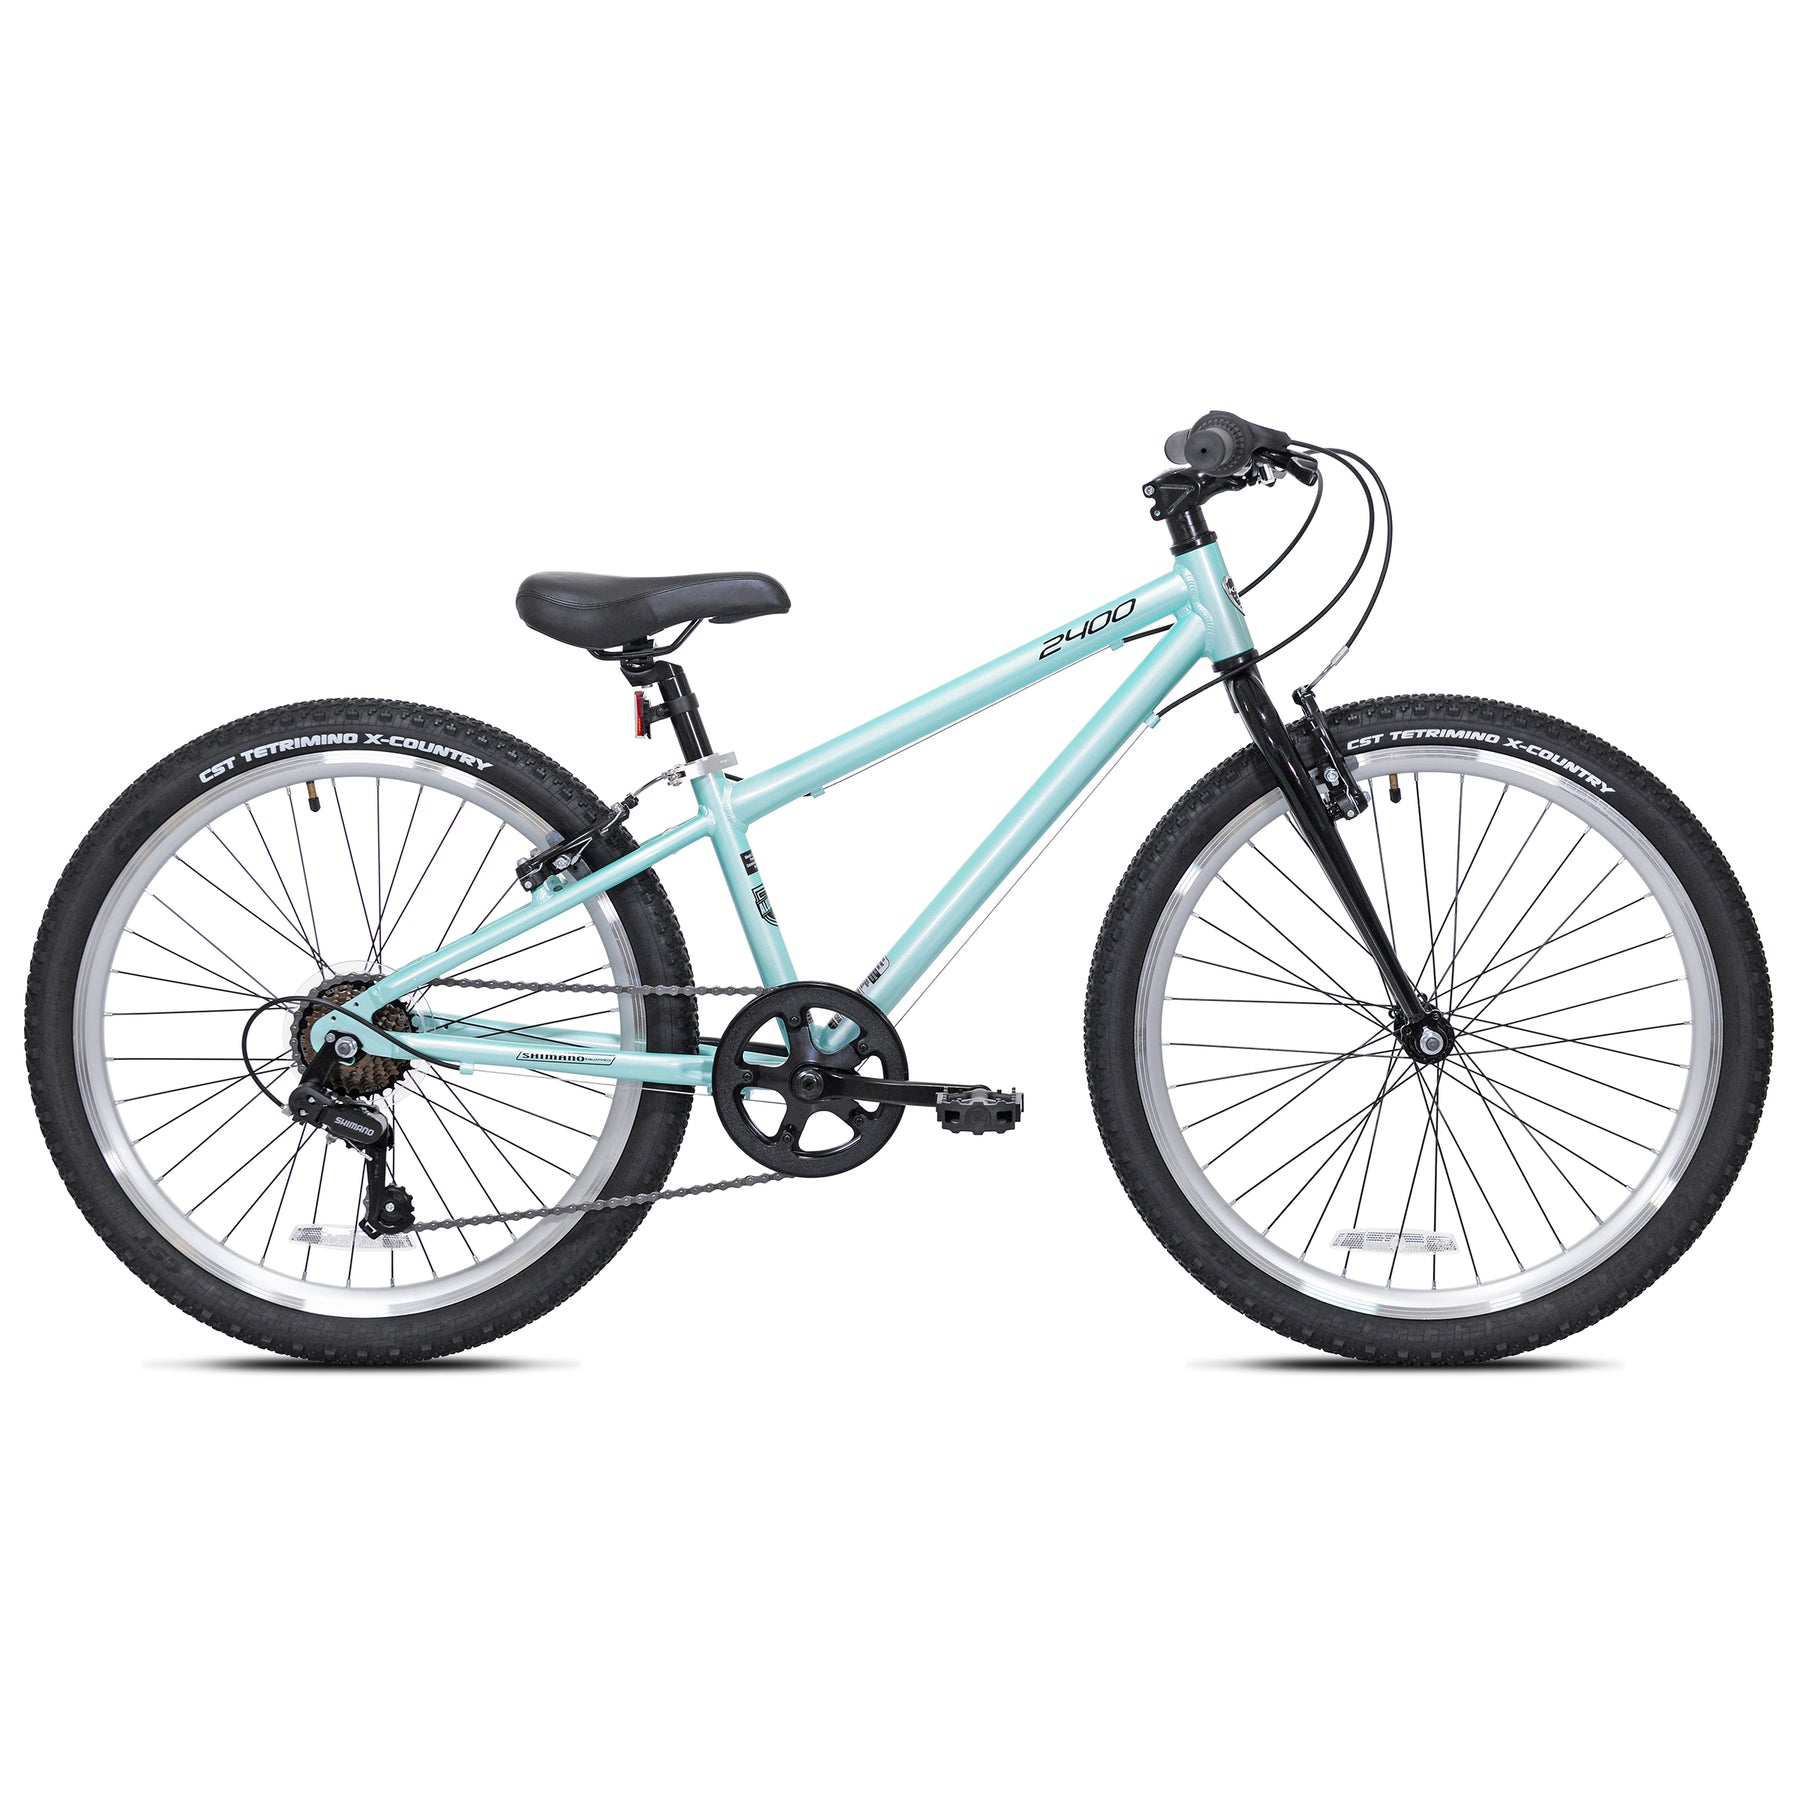 24" Kent 2400 | Mountain Bike for Kids Ages 8+